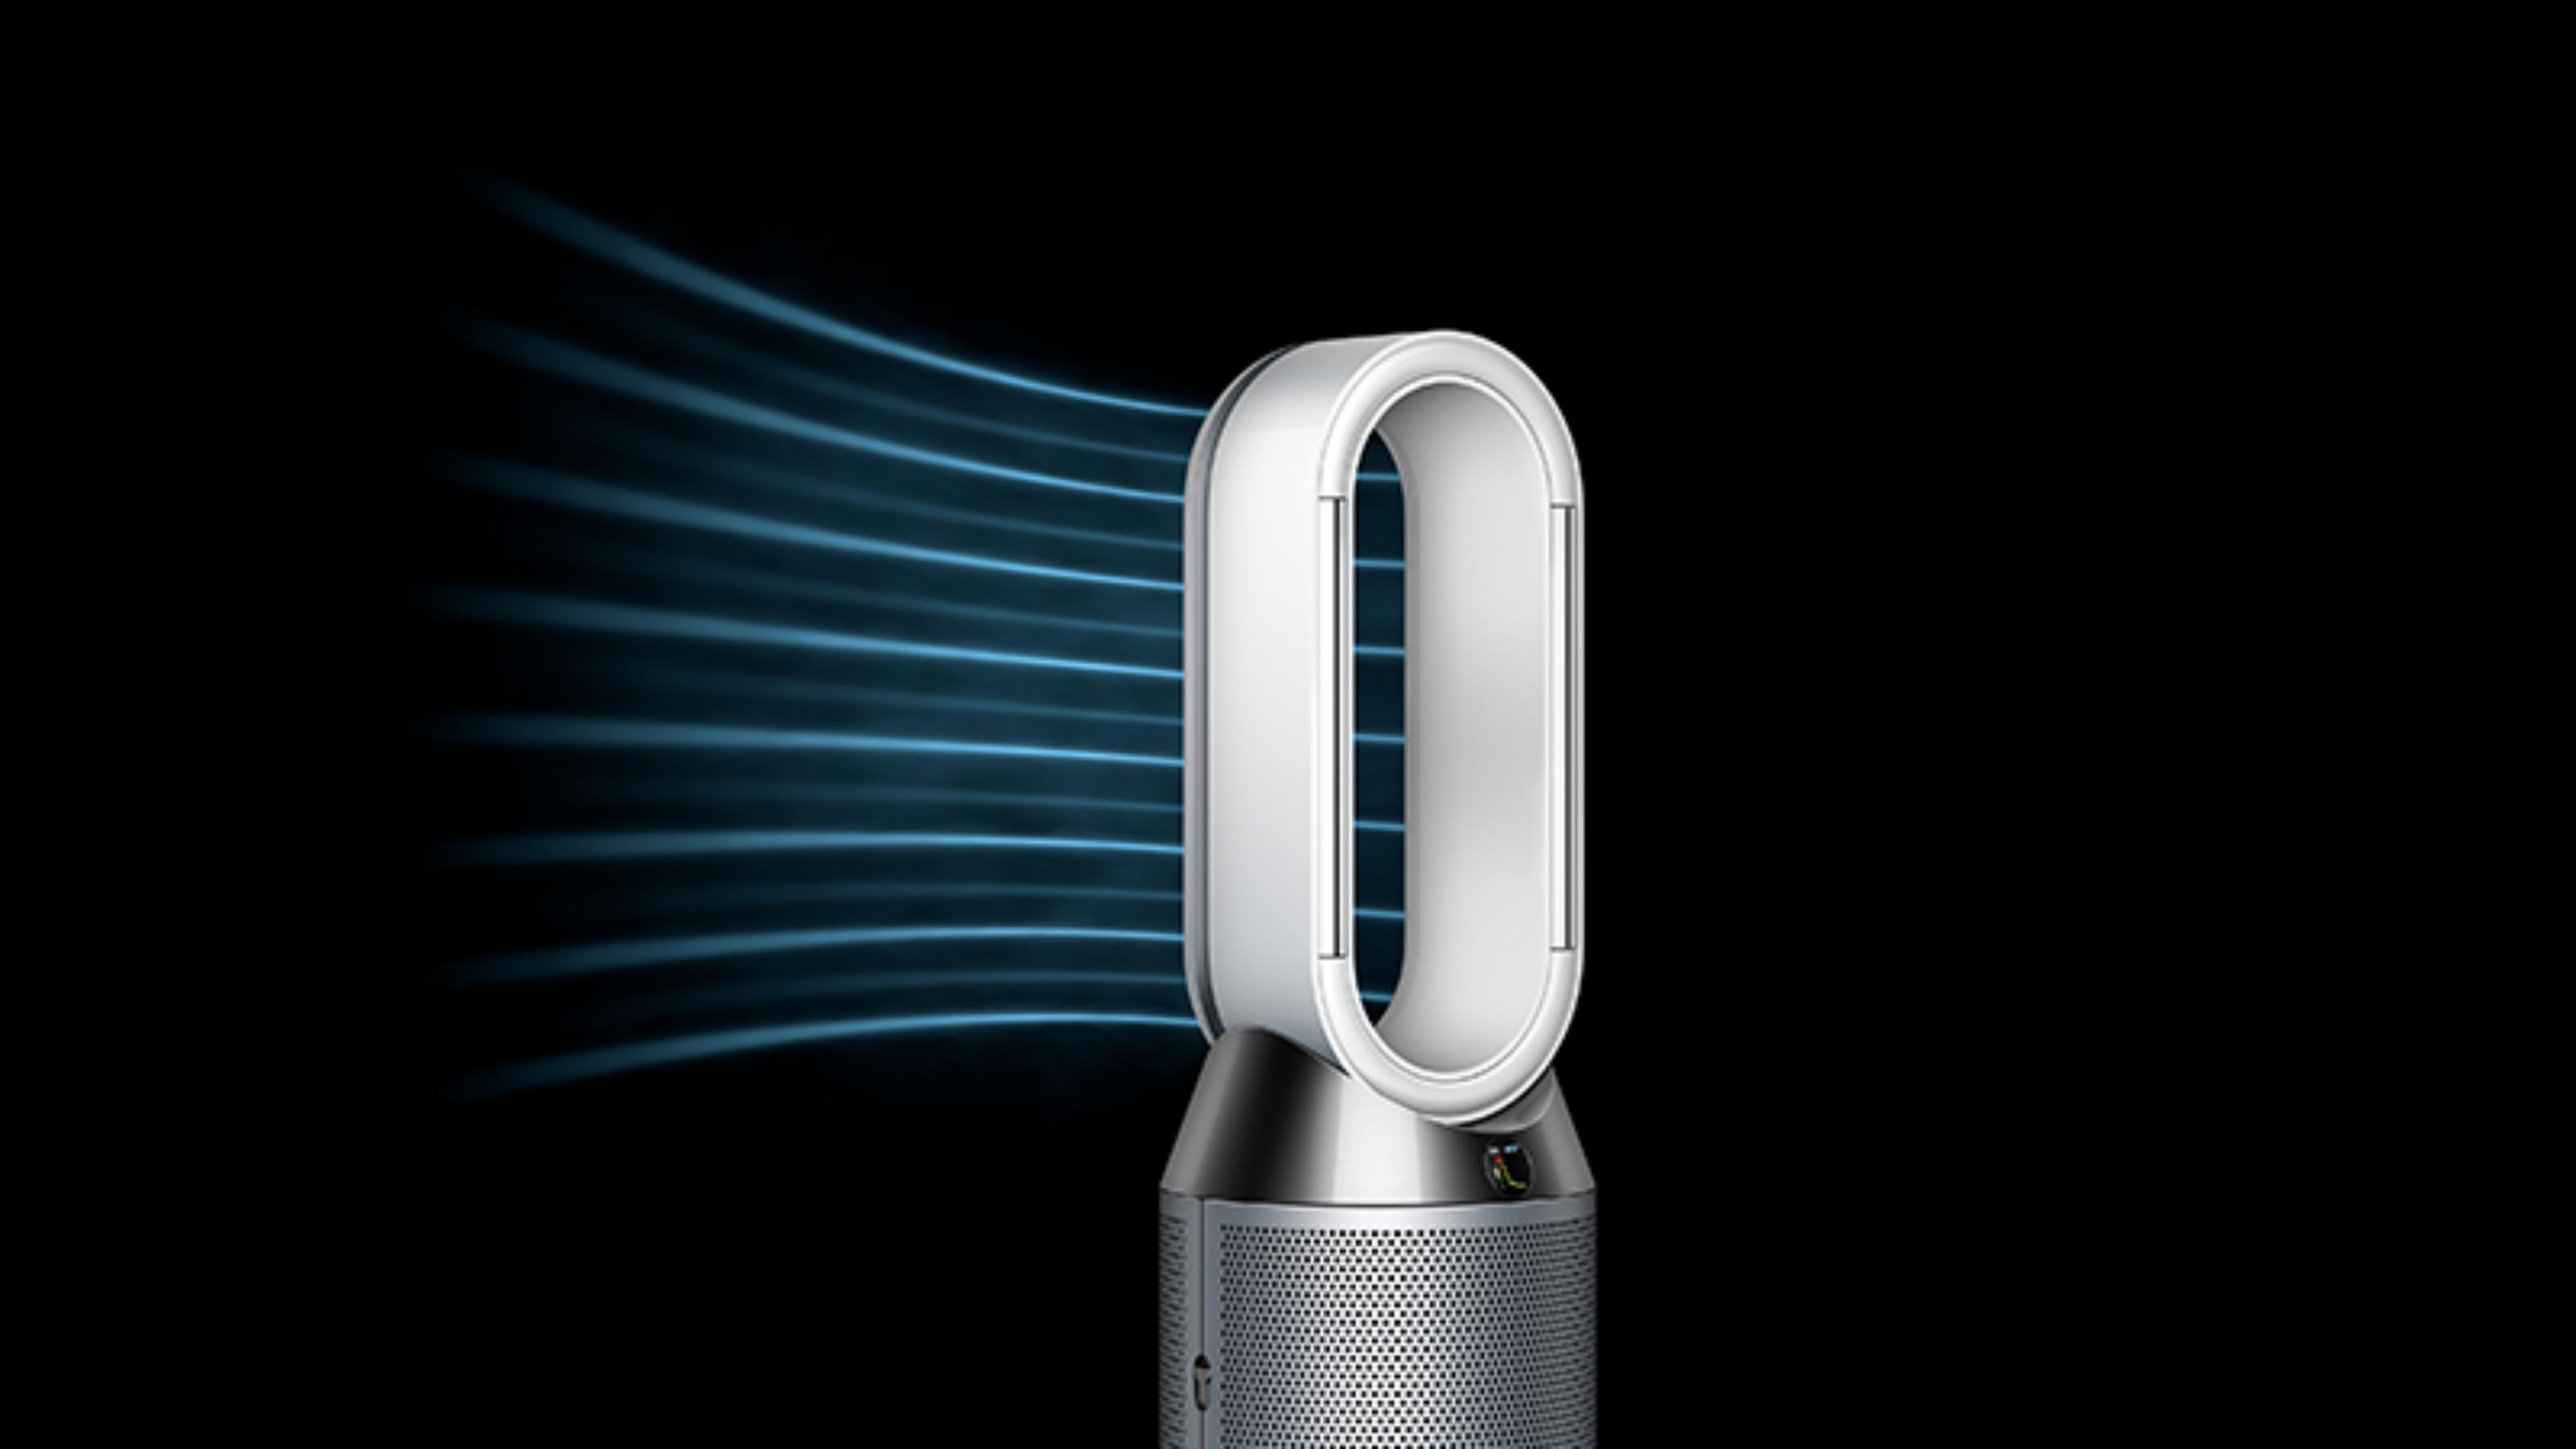 Dyson purifier humidifier in Diffused mode